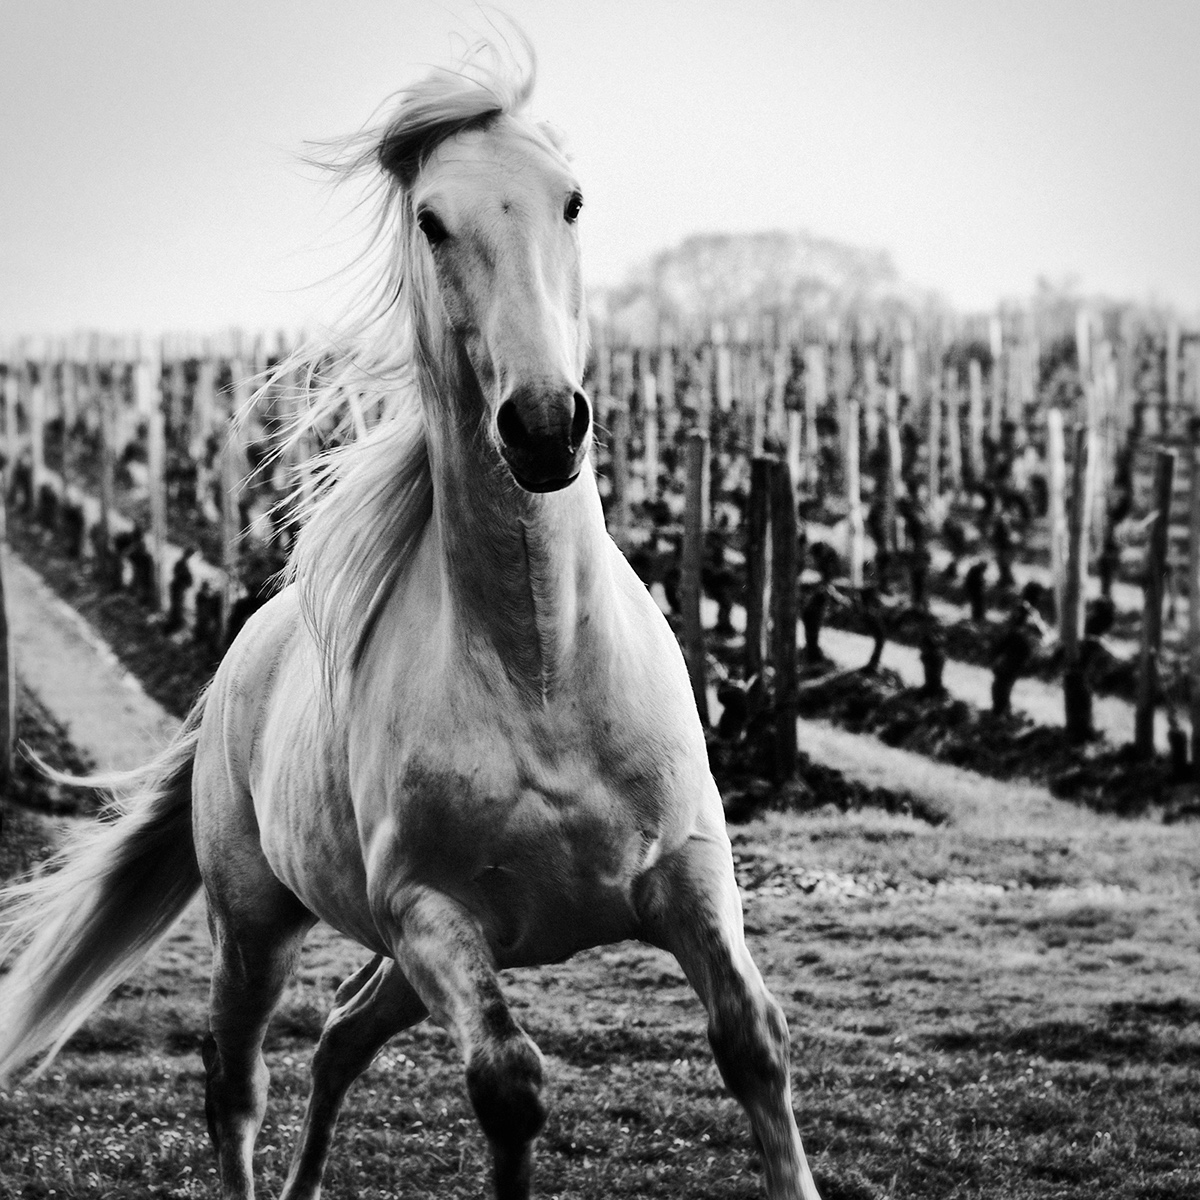 www.davidmarvier.com black and white photograph horse animal david marvier beauty Picture shooting location muscle wild savage freedom